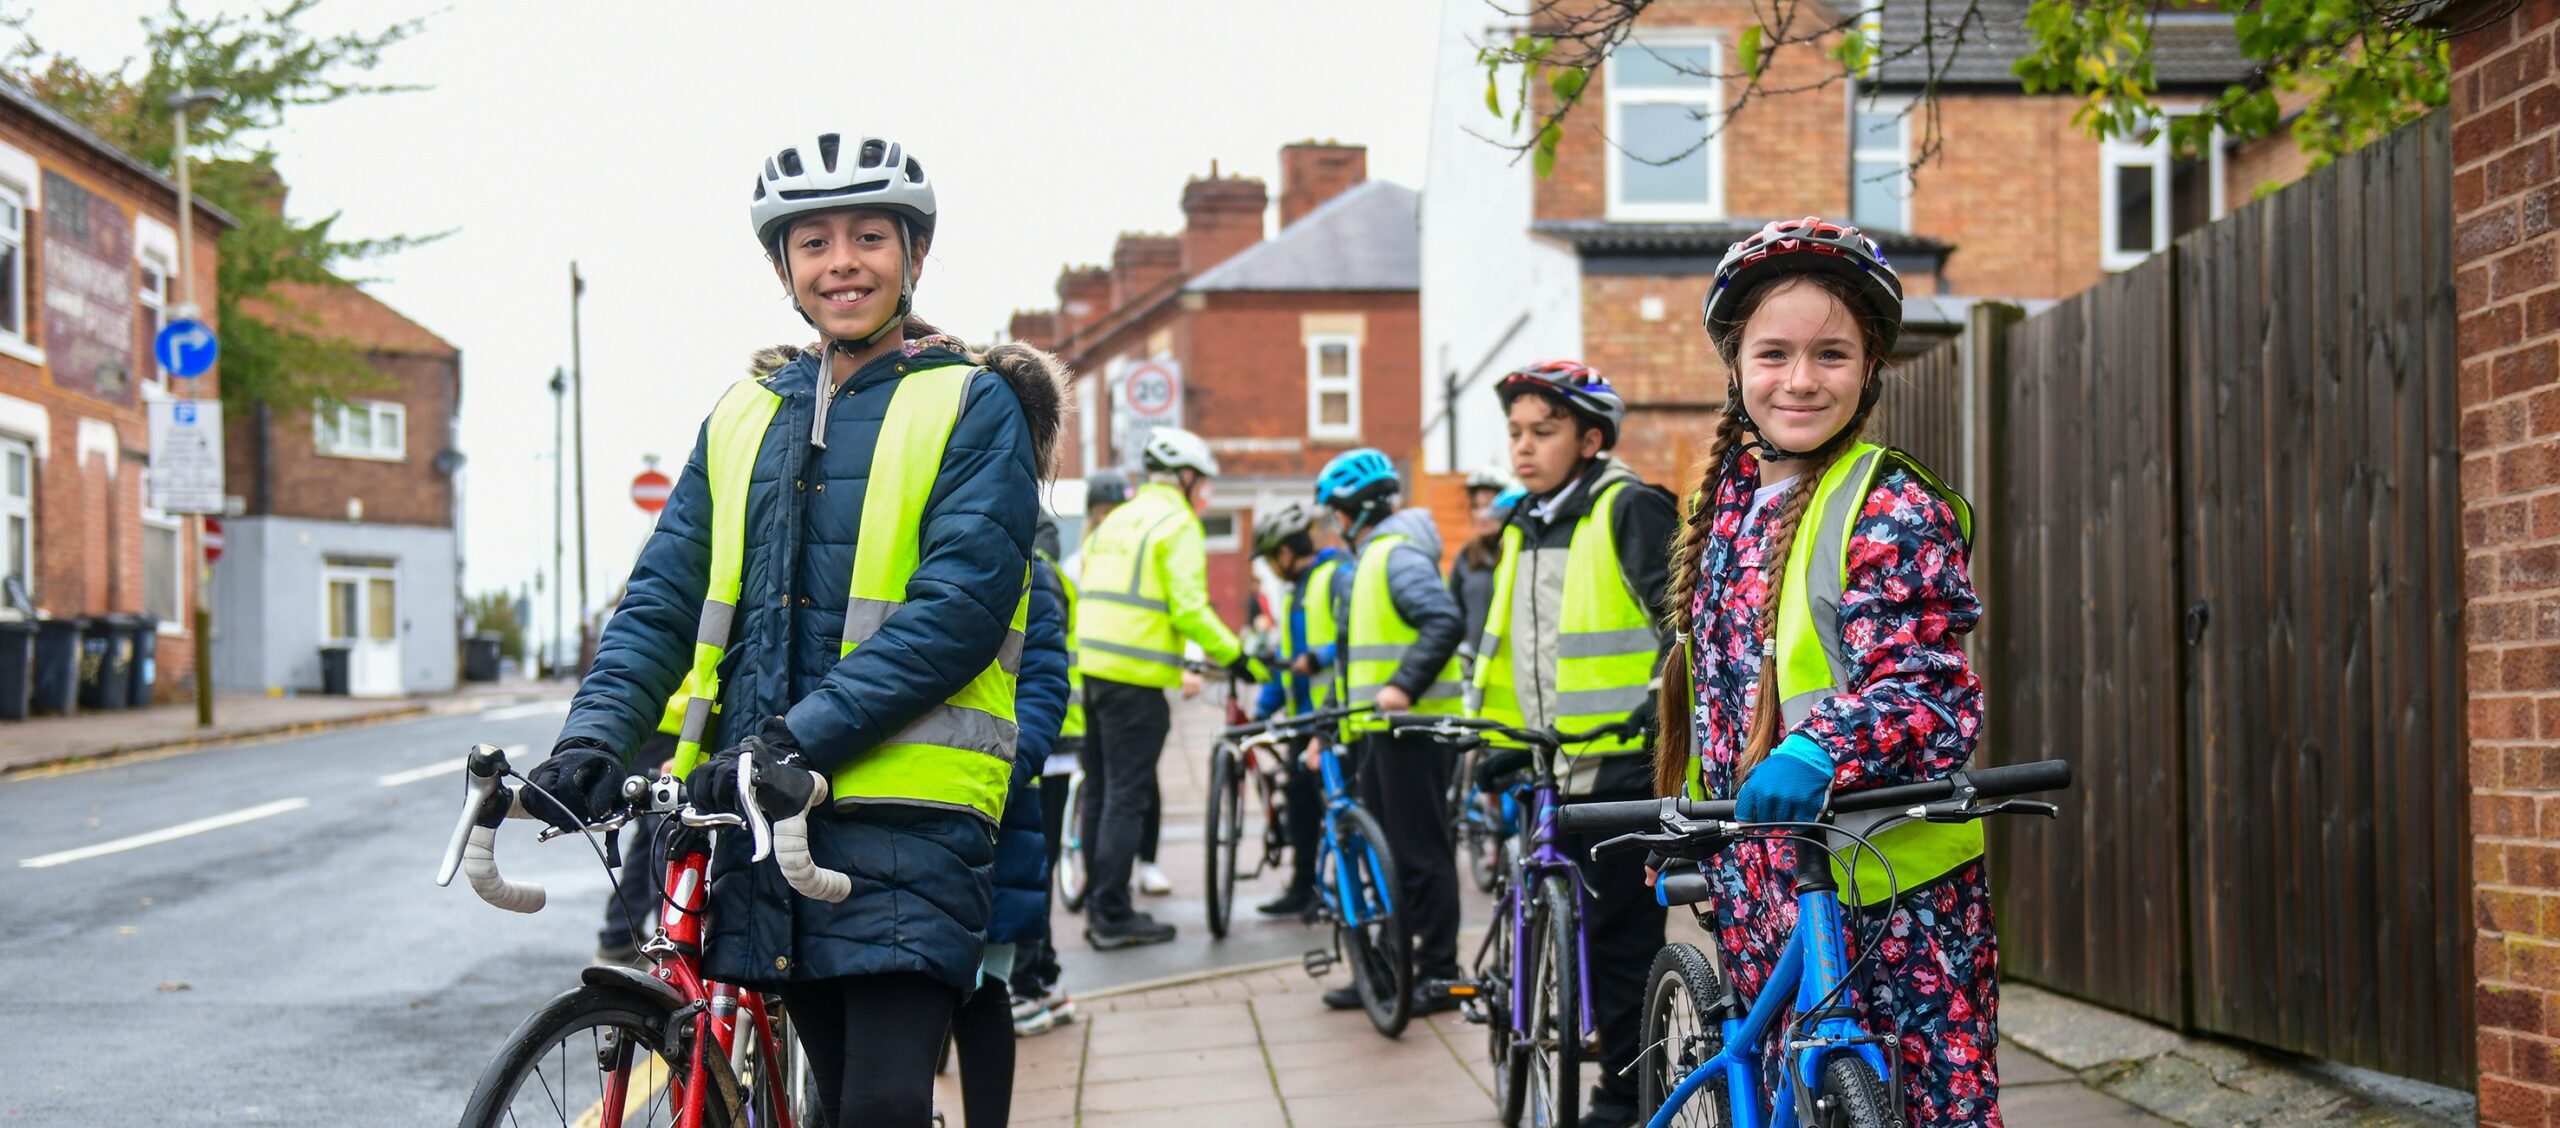 A class of children learn to cycle with Bikeability. They are lined up two-abreast with their bicycles, on a pavement adjacent to a residential road. The two children at the front are smiling, wearing safety helmets and high-vis vests.